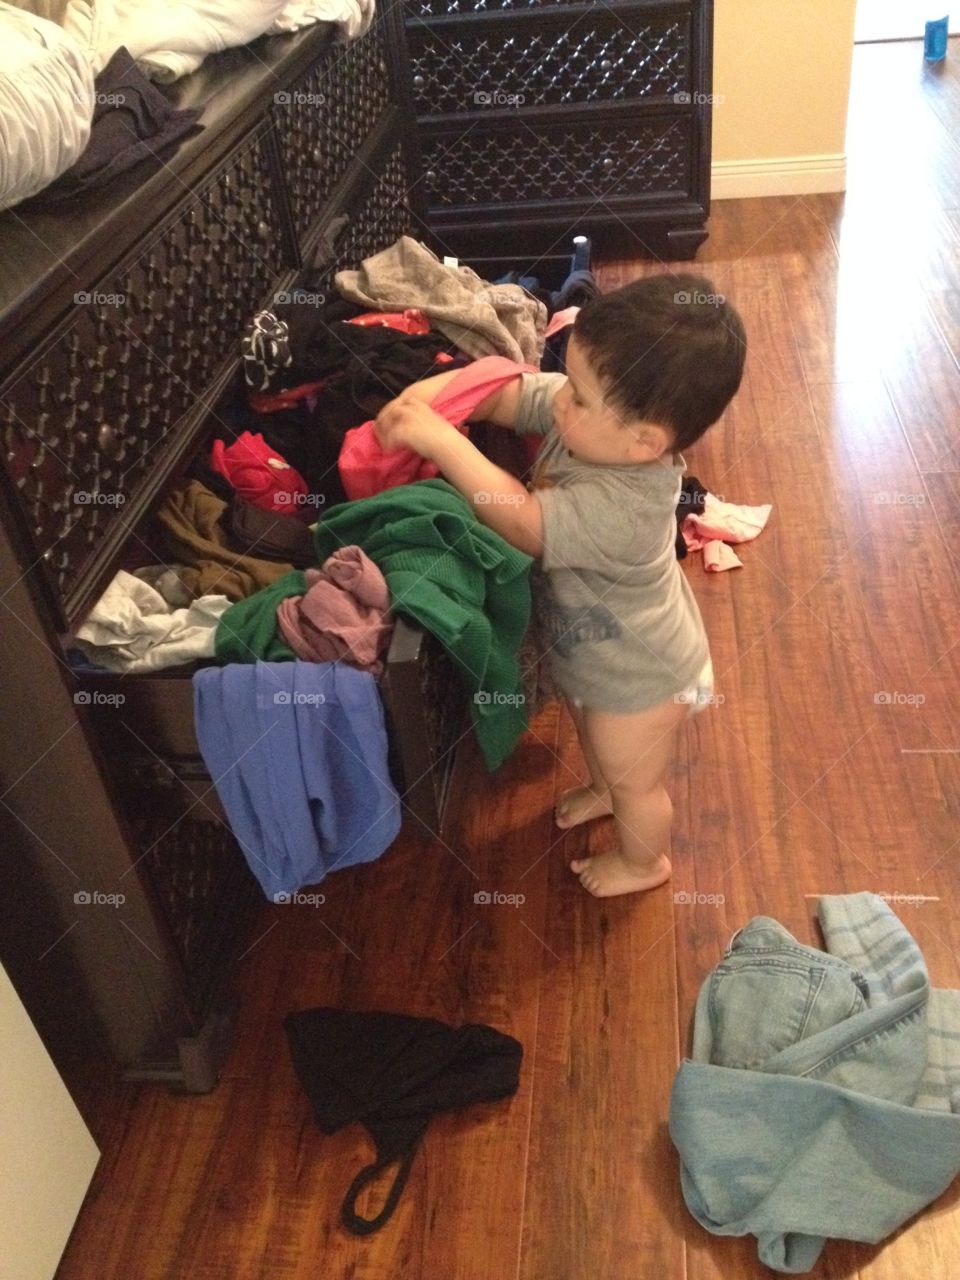 Making a mess. Clothes